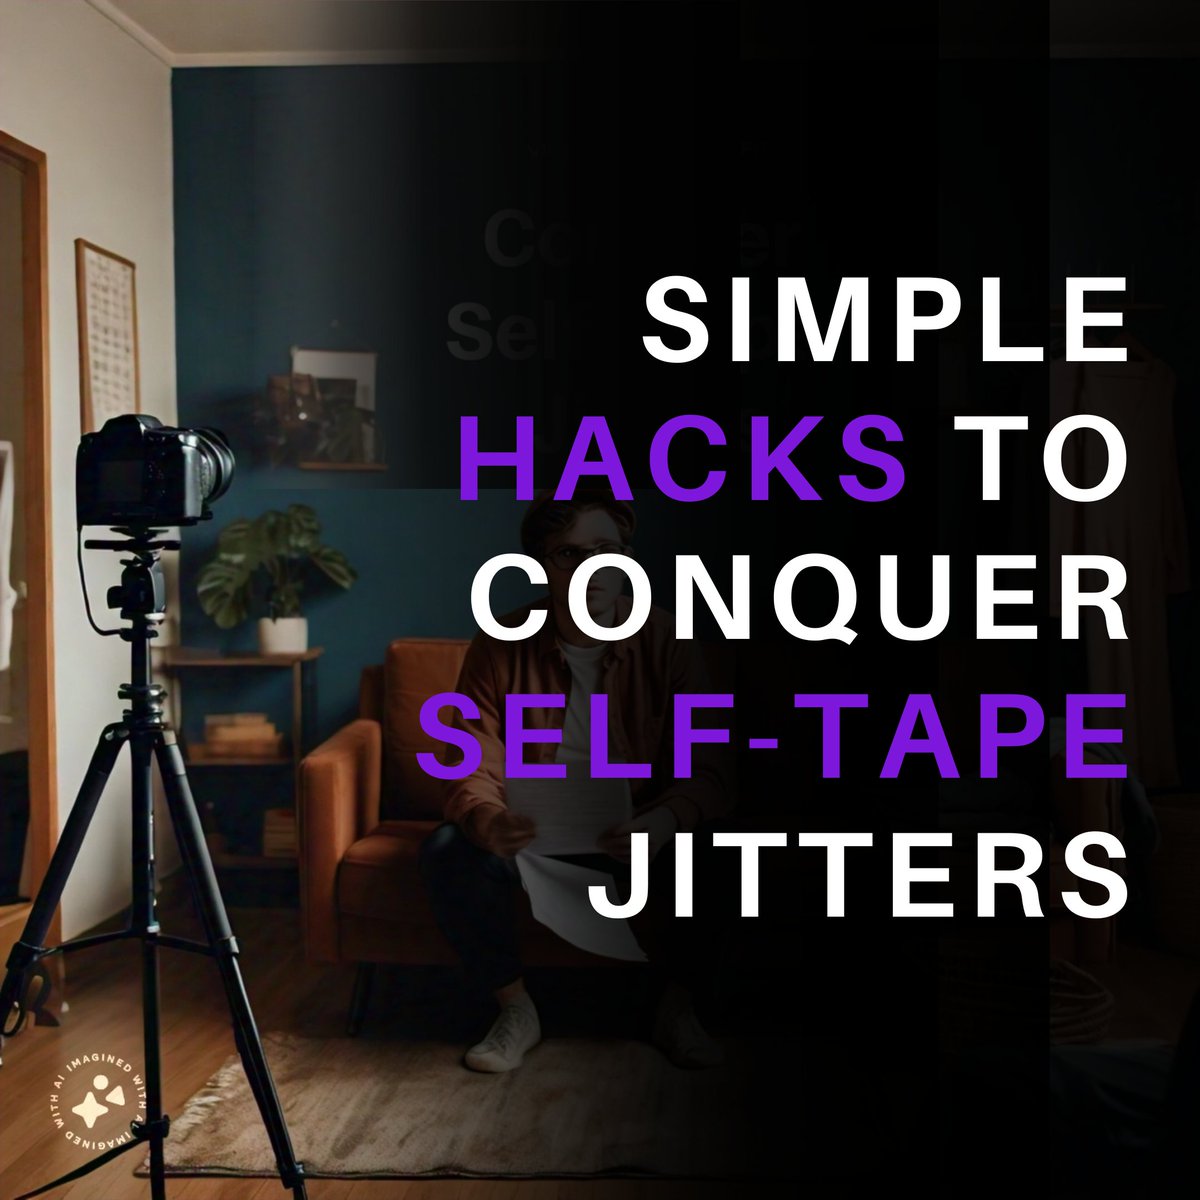 Self-tape jitters? Conquer them! 
Film near a window (avoid direct sunlight) or use a ring light.
Clear audio! Invest in an external mic & record in a quiet space. ️
Background: Simple is best! Solid-colored wall & clear the clutter.
You've got this💪
#ActingTips #SelfTapeHacks